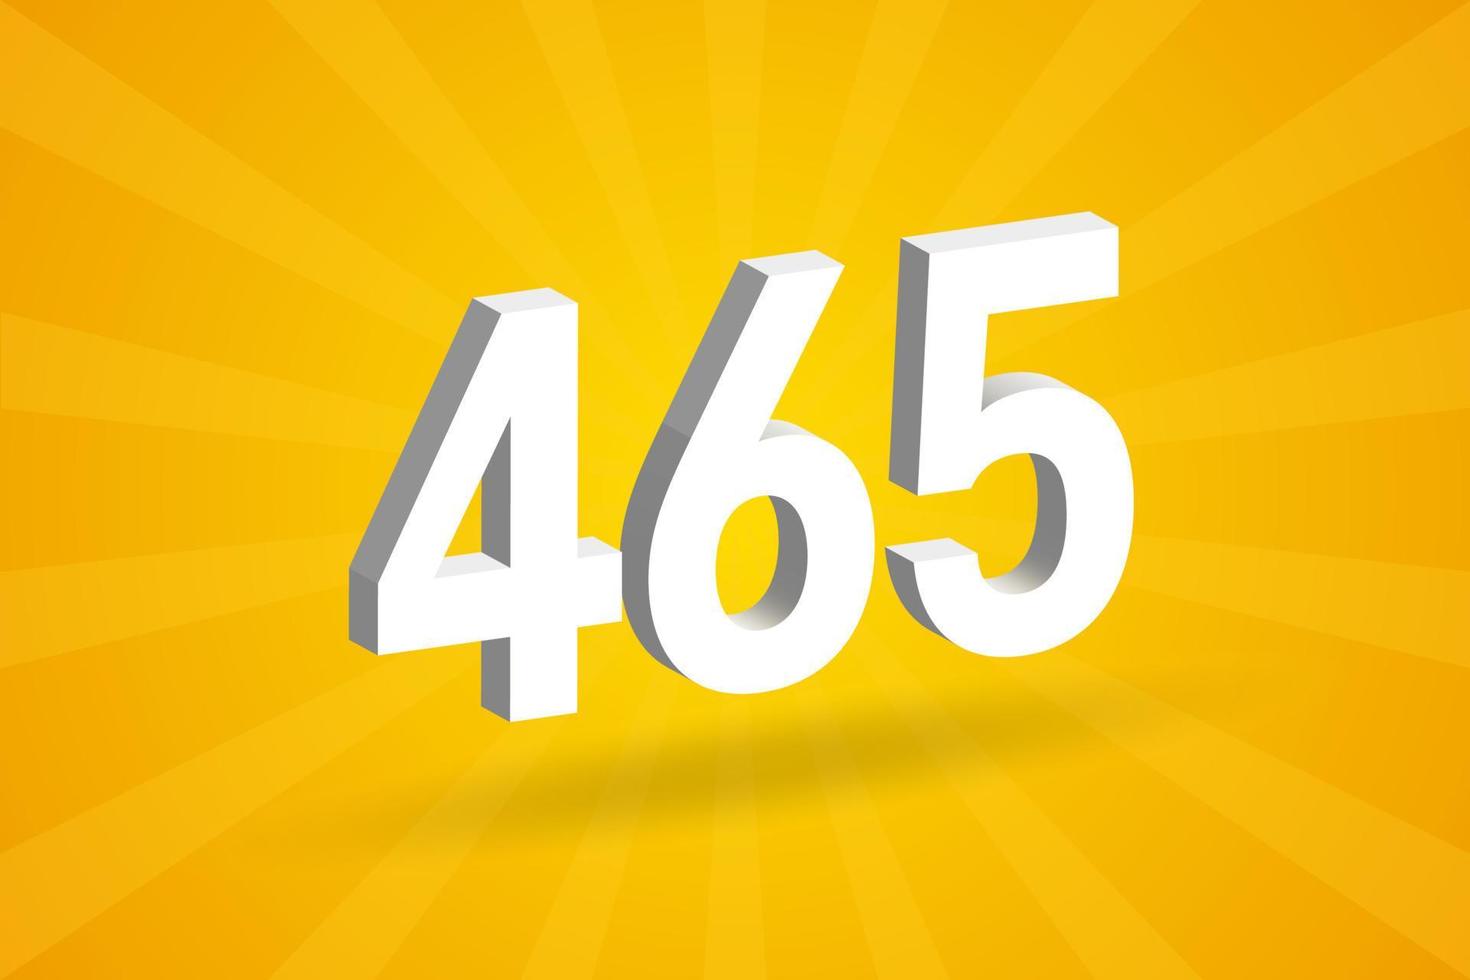 3D 465 number font alphabet. White 3D Number 465 with yellow background vector